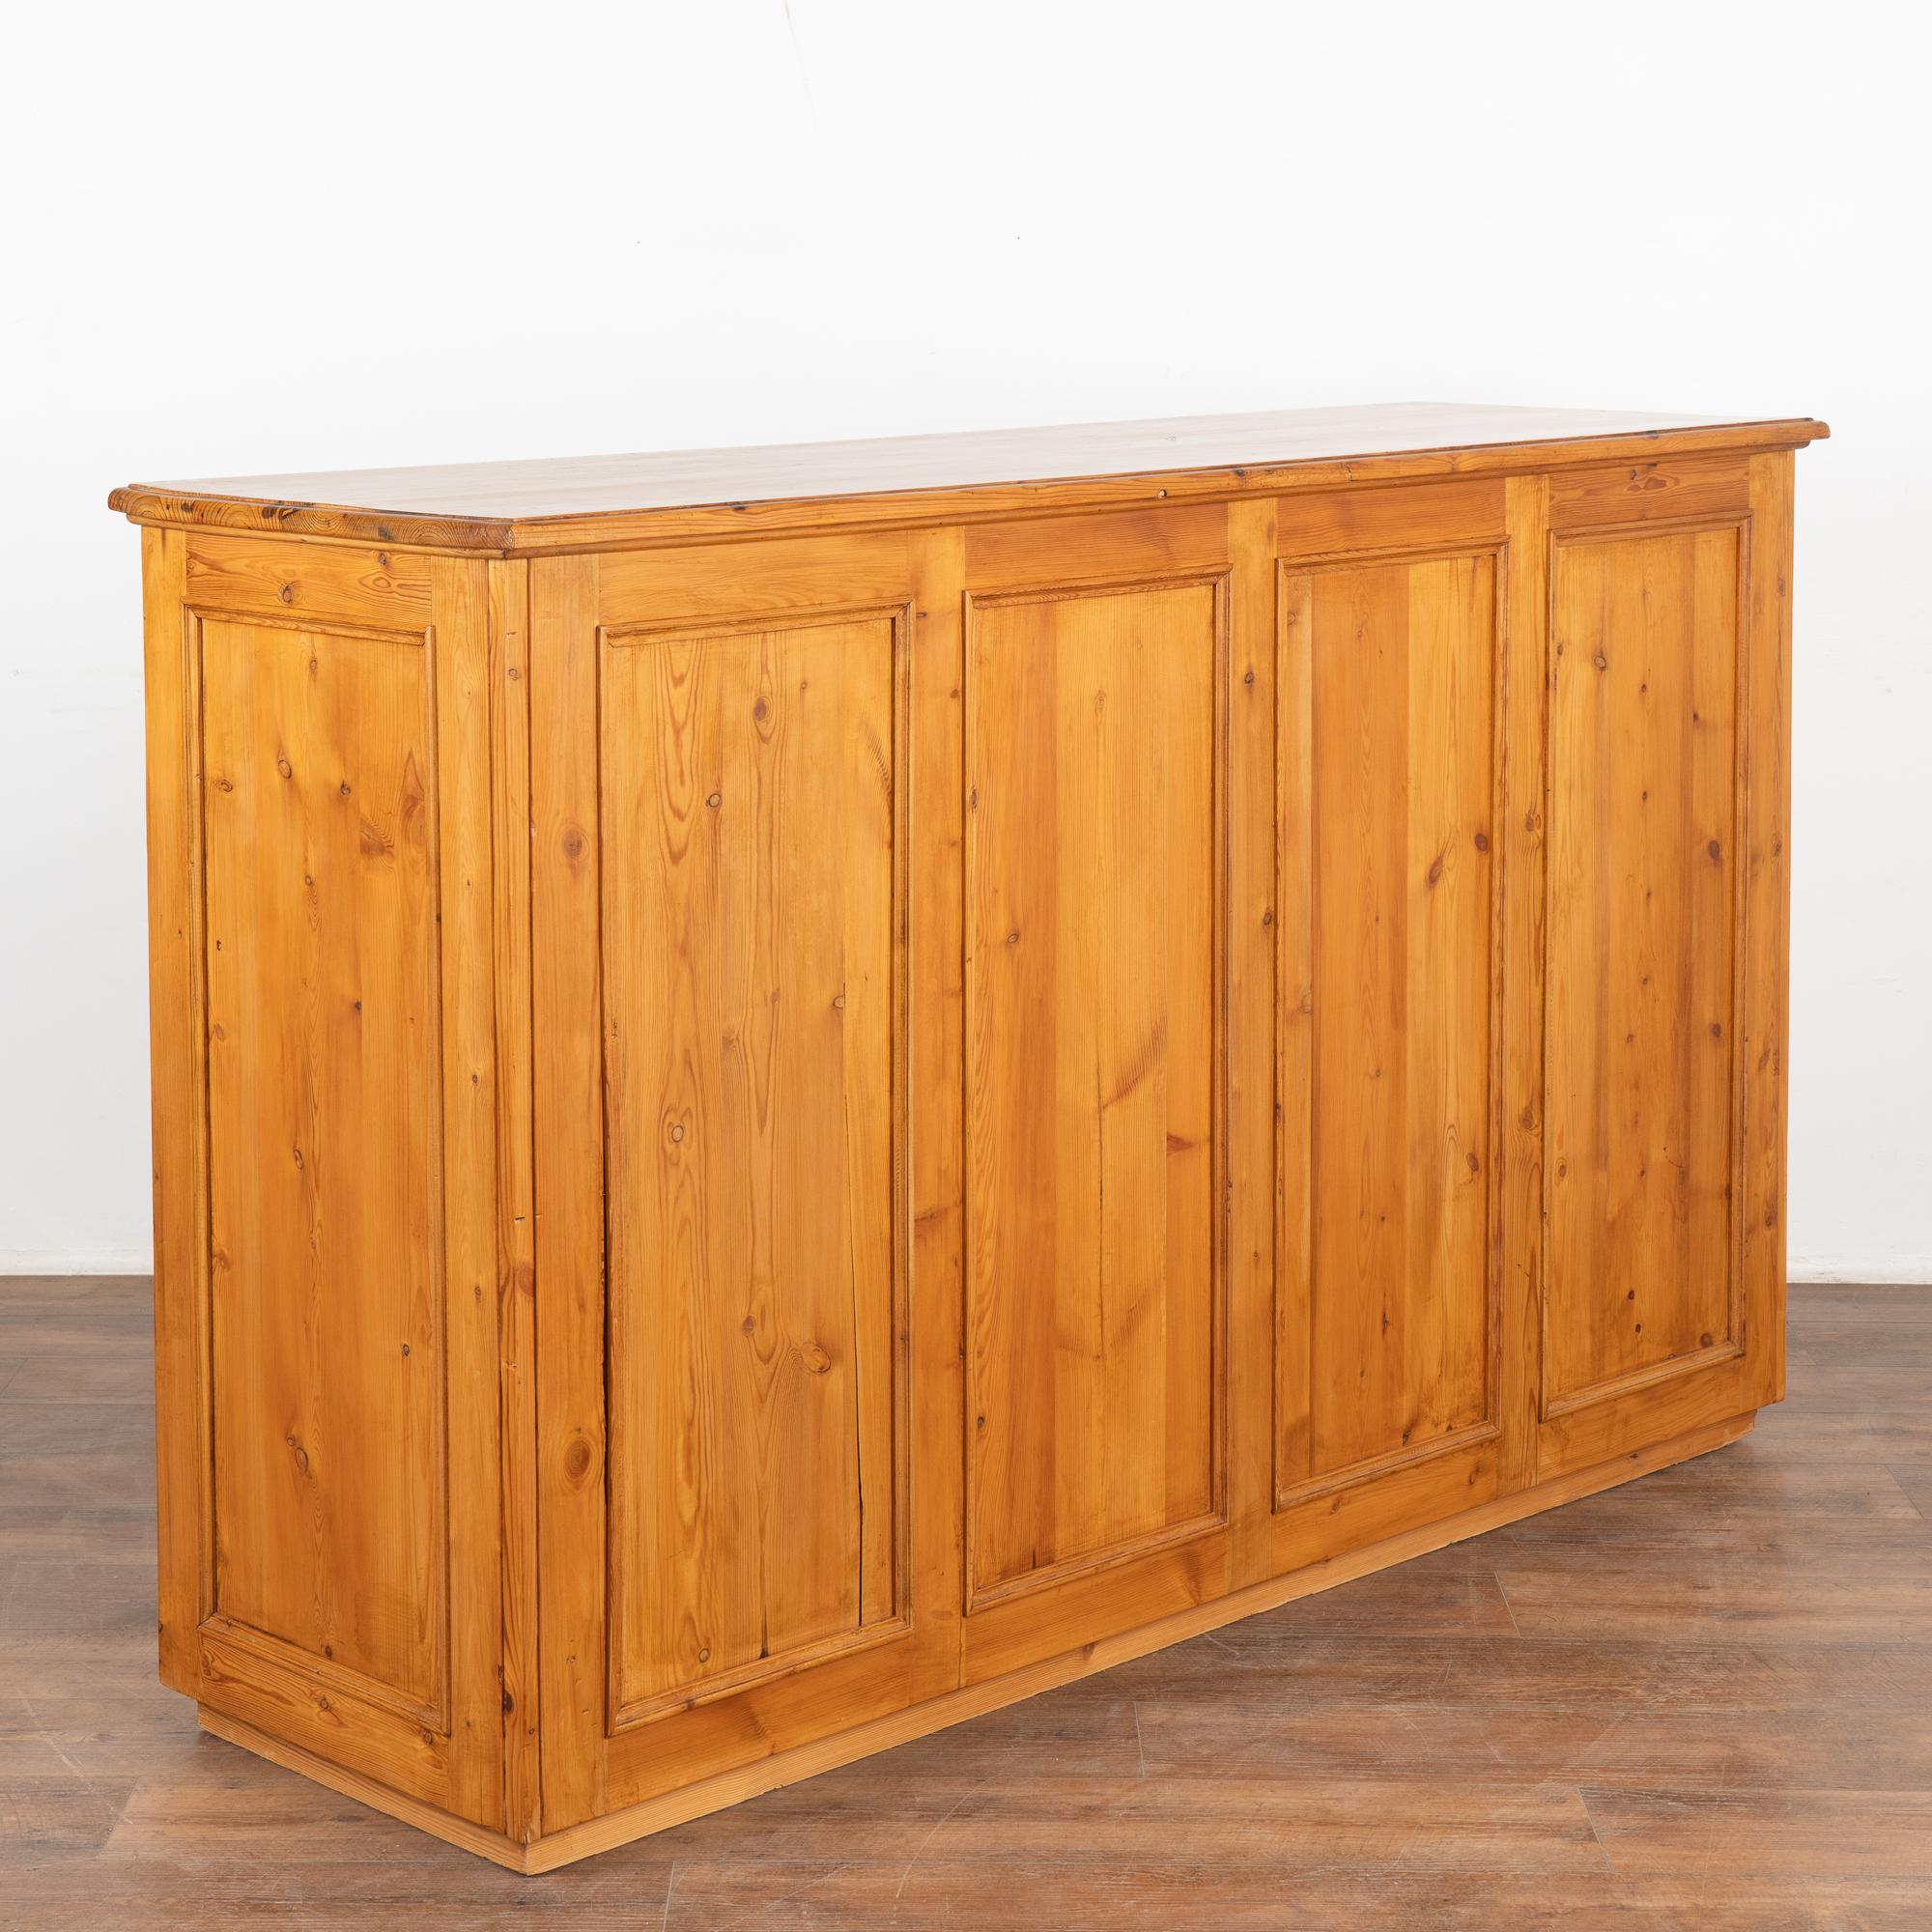 Free Standing Pine Apothecary Counter with 64 Drawers, Kitchen Island circa 1900 For Sale 2